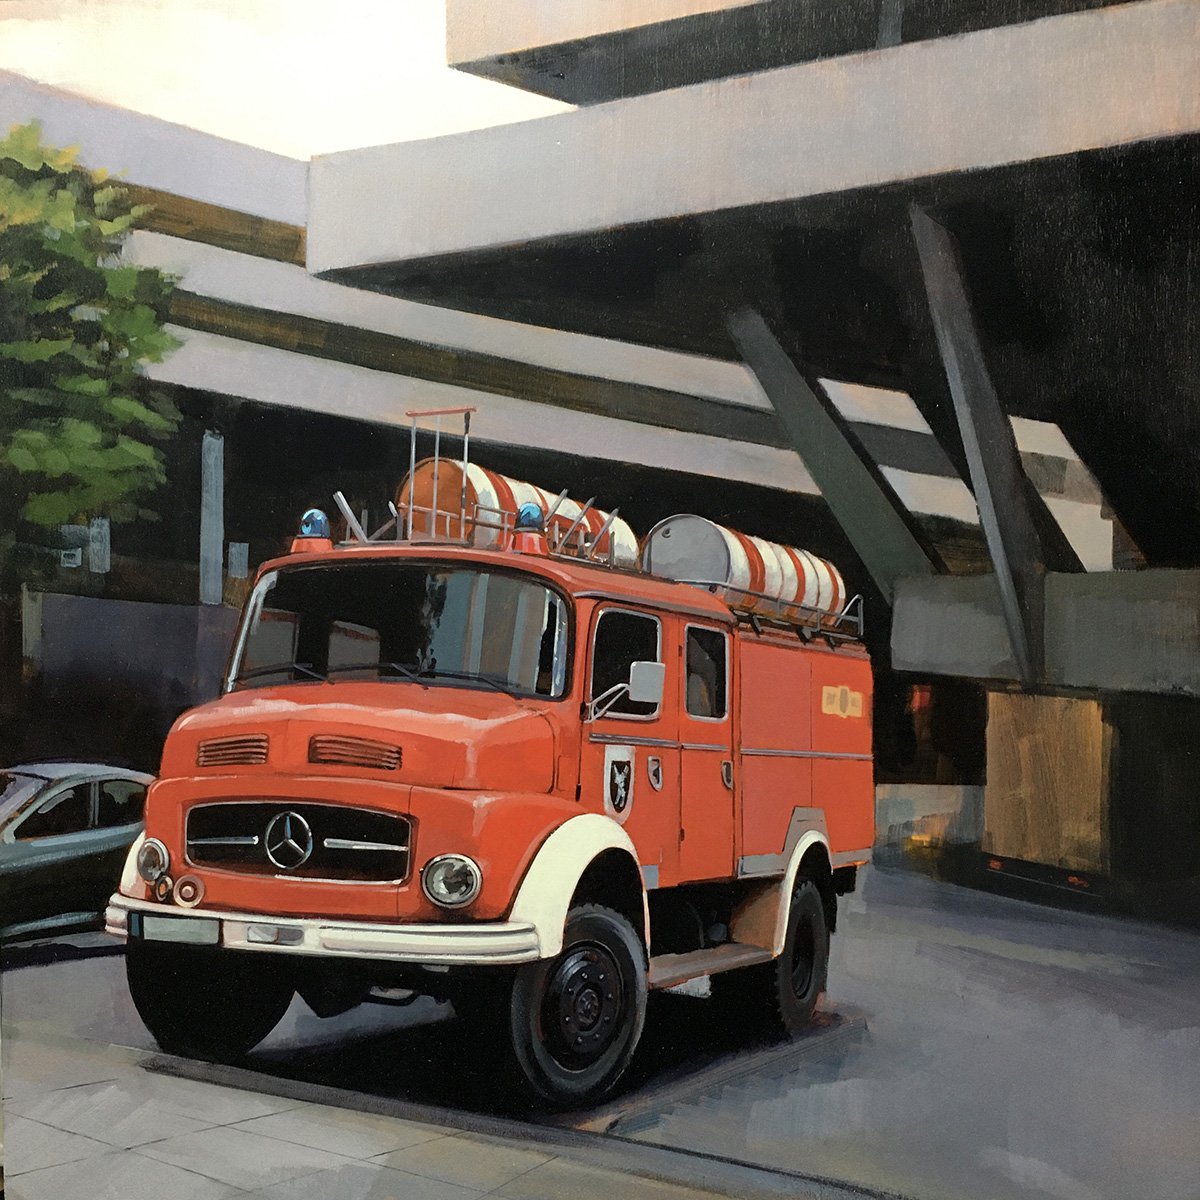 Fire Engine at The Southbank by Andrew Morris